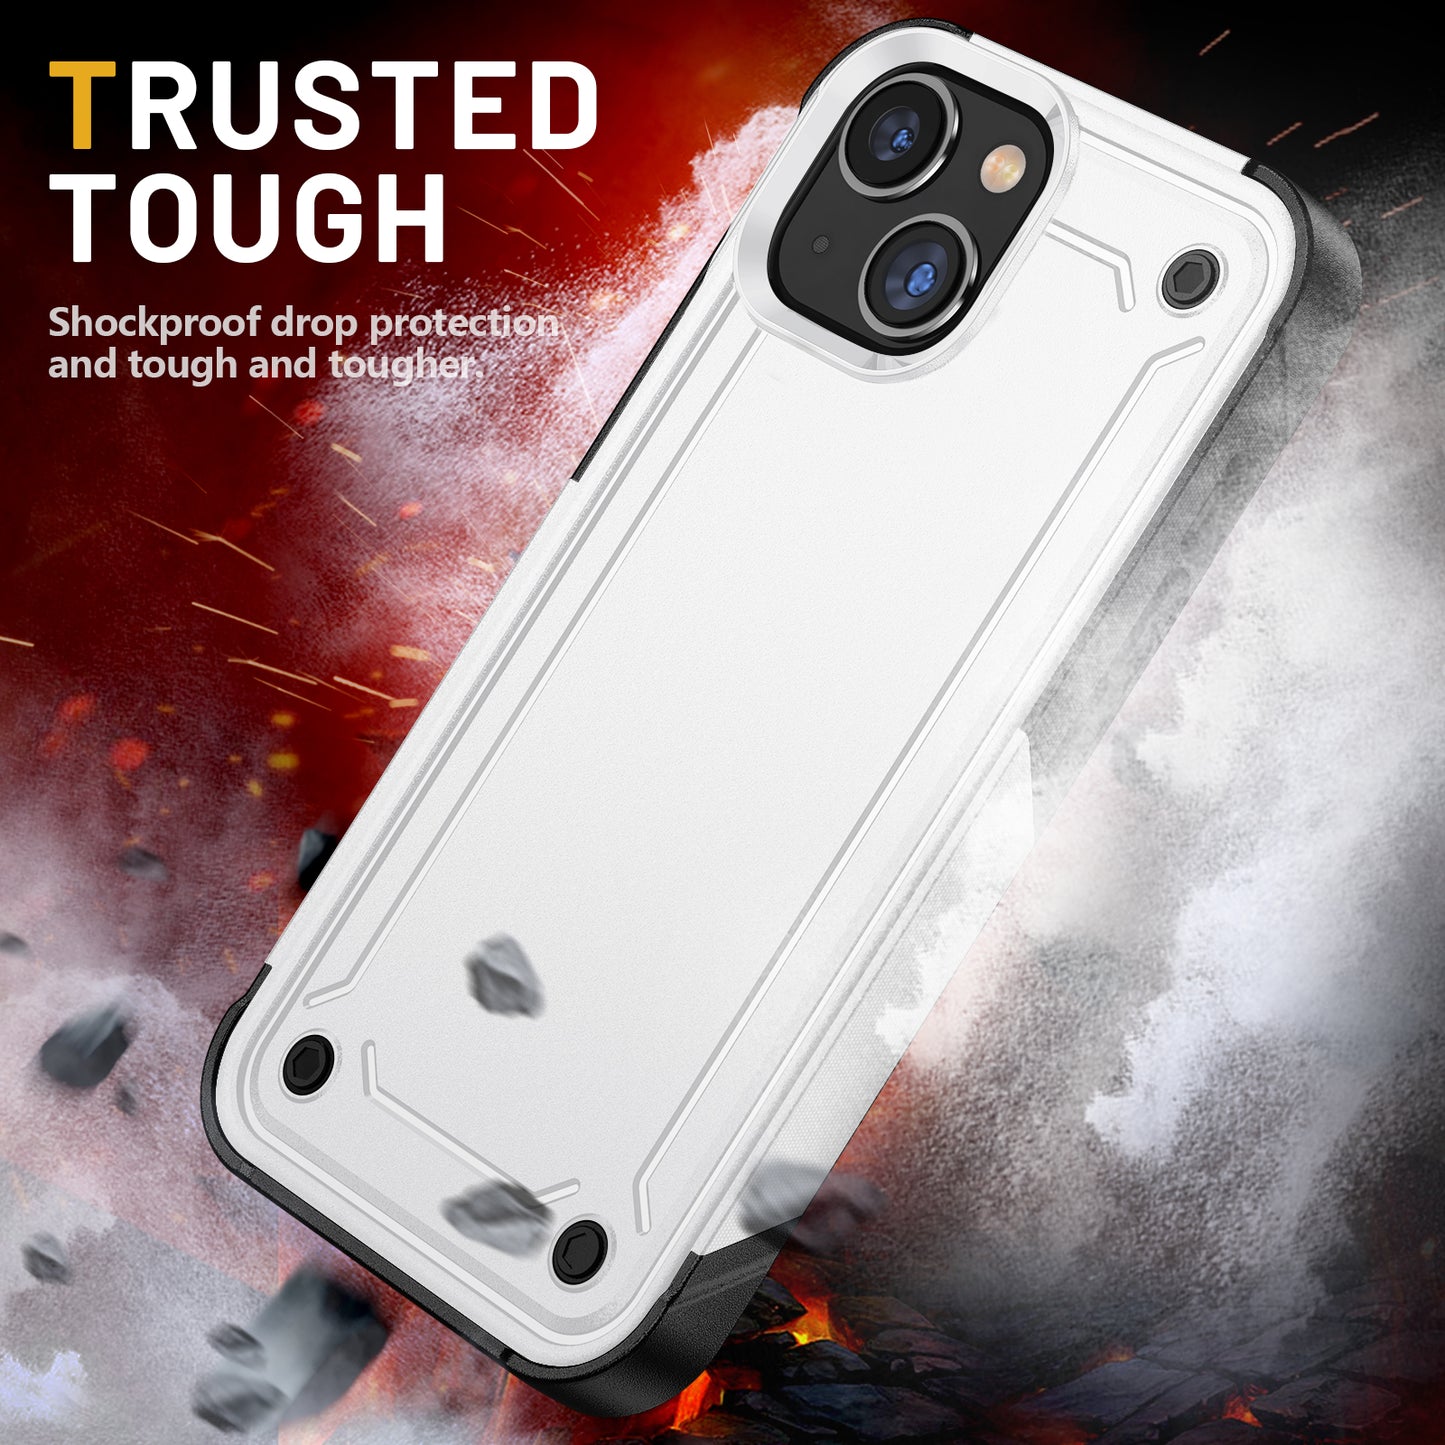 new shockproof armor hybrid soft tpu hard pc 2 in 1 mobile phone case for iphone 11 pro max